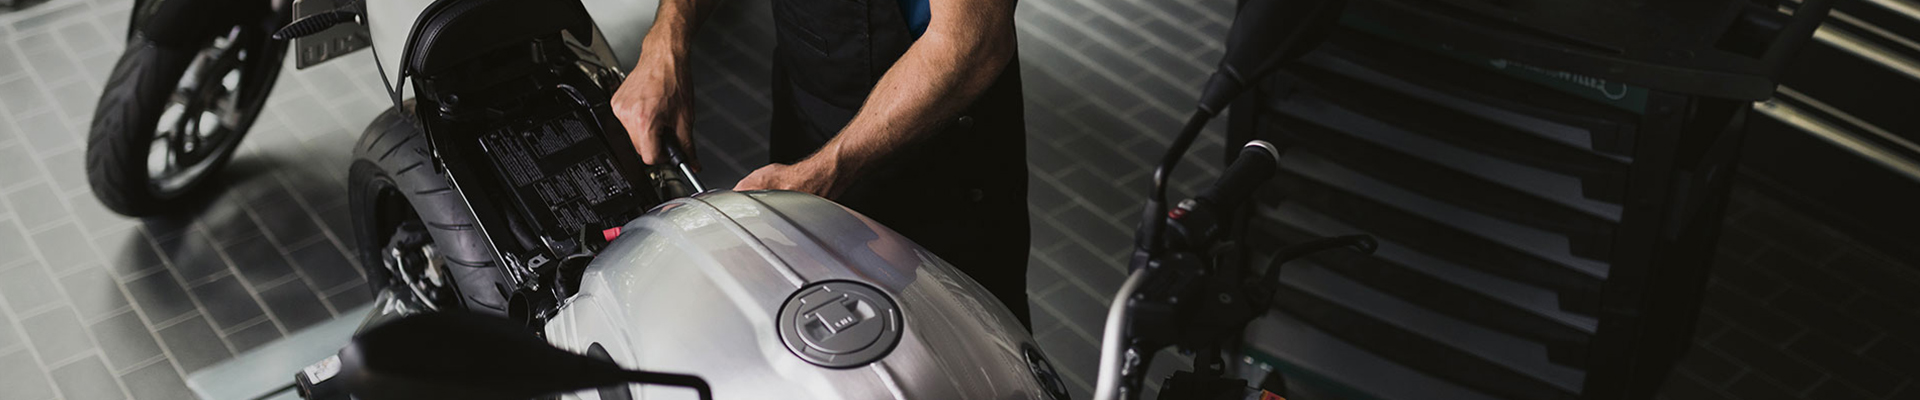 BMW Motorcycle Service | Authorized Service Centers - Northern California